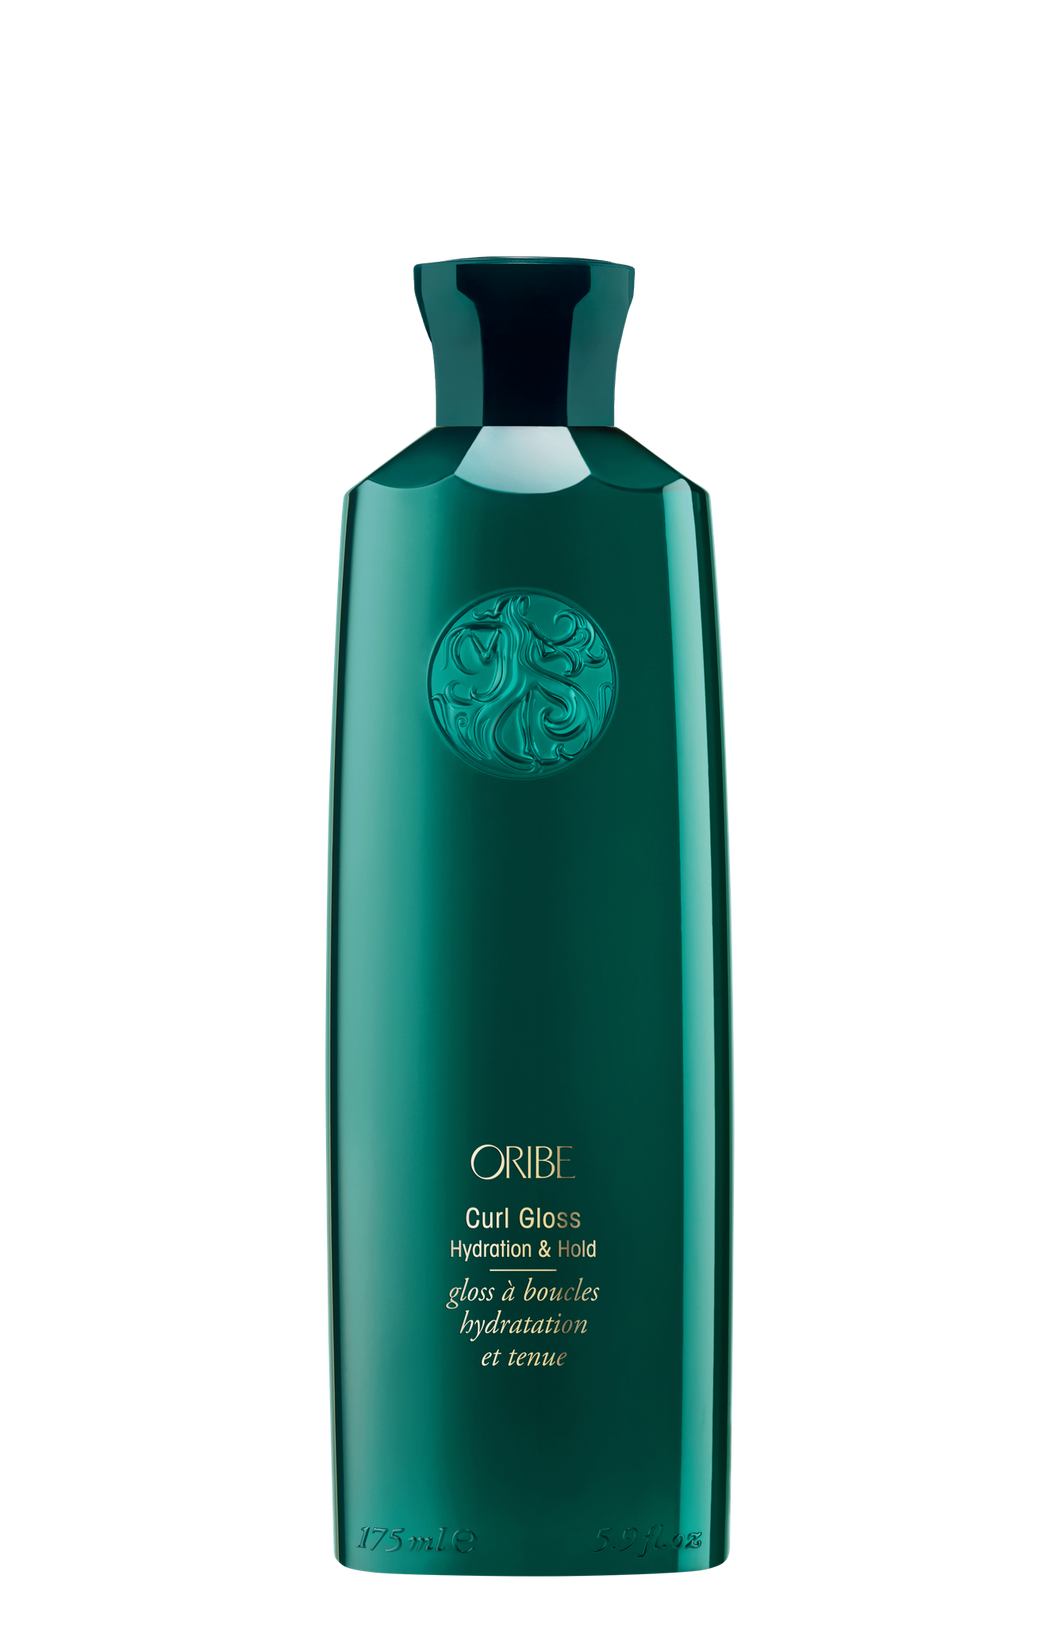 Curl Gloss Hydration & Hold, 5.9 OZ.